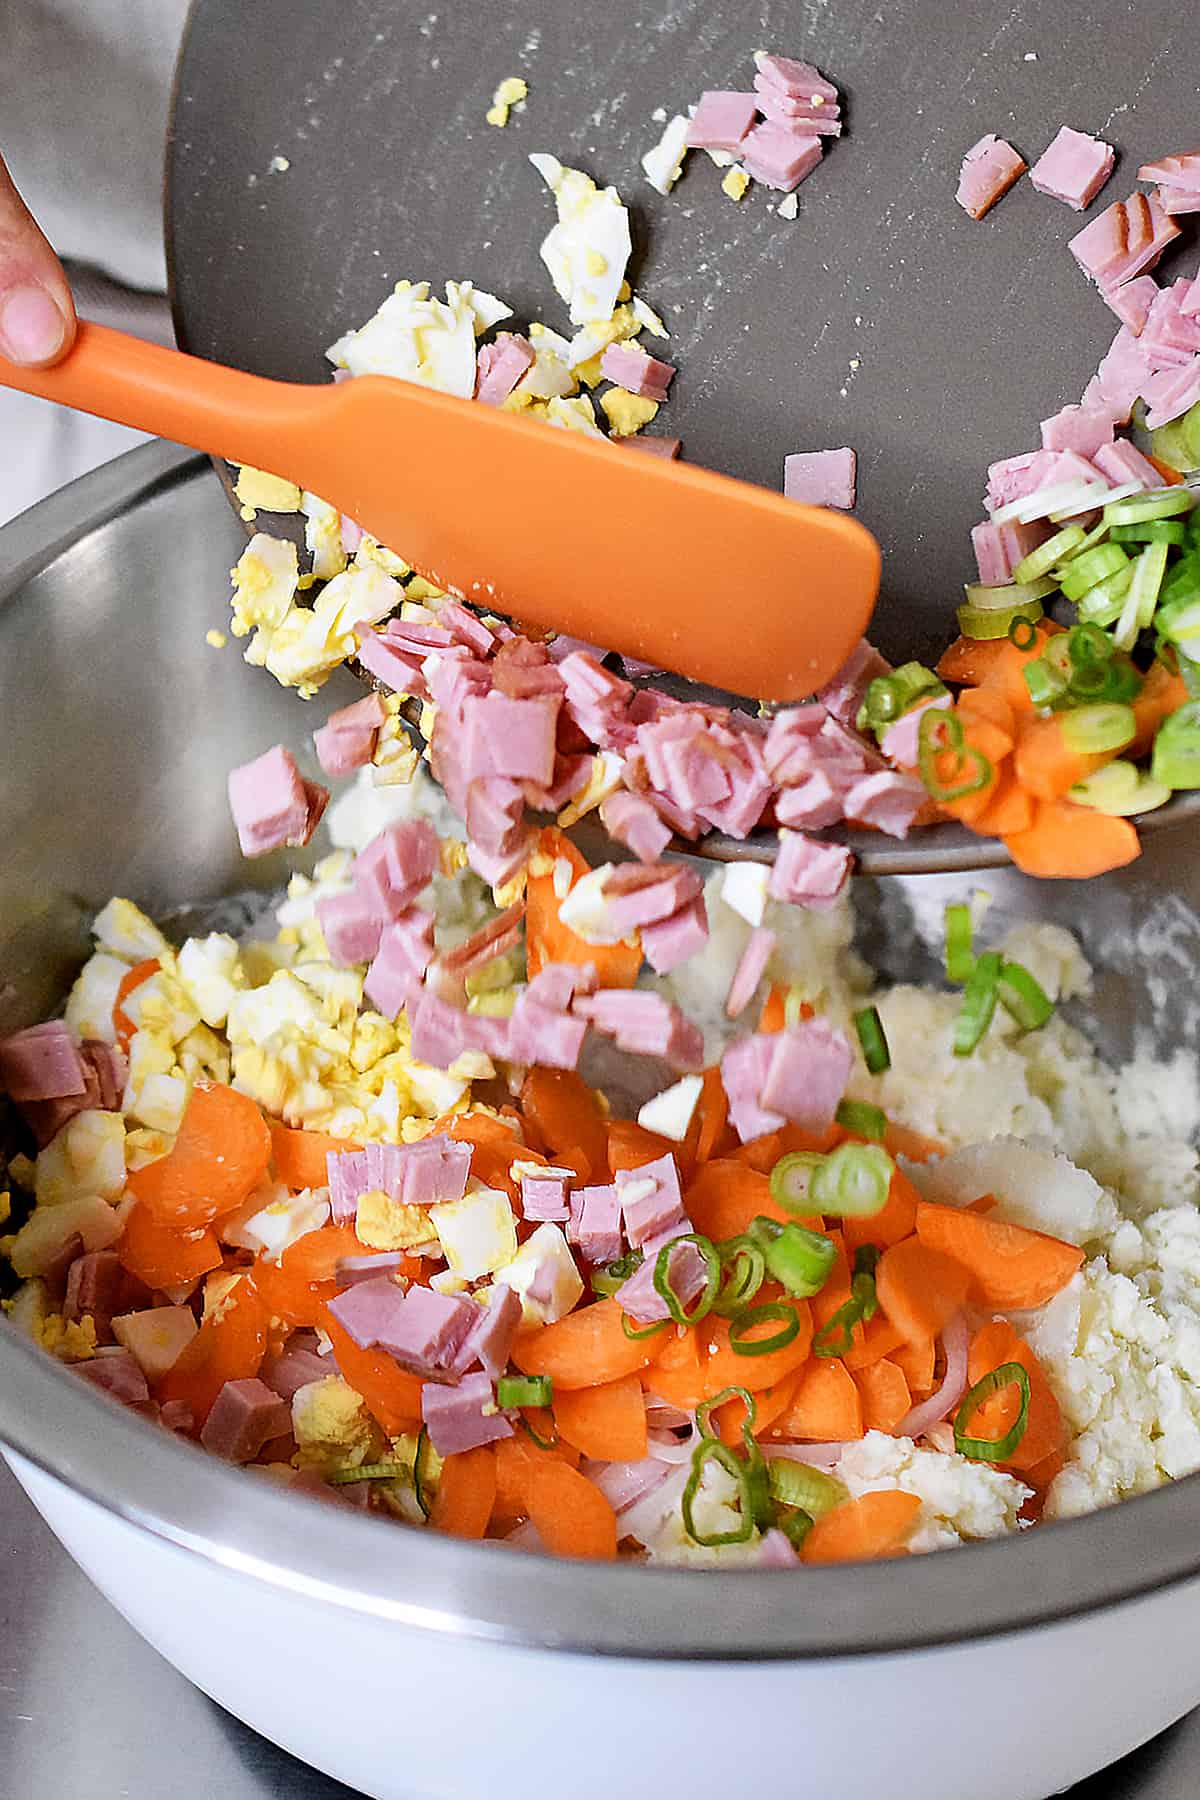 Adding diced ham, sliced carrots, hard boiled eggs, and sliced green onions to a bowl filled with mashed potatoes to make Japanese potato salad.